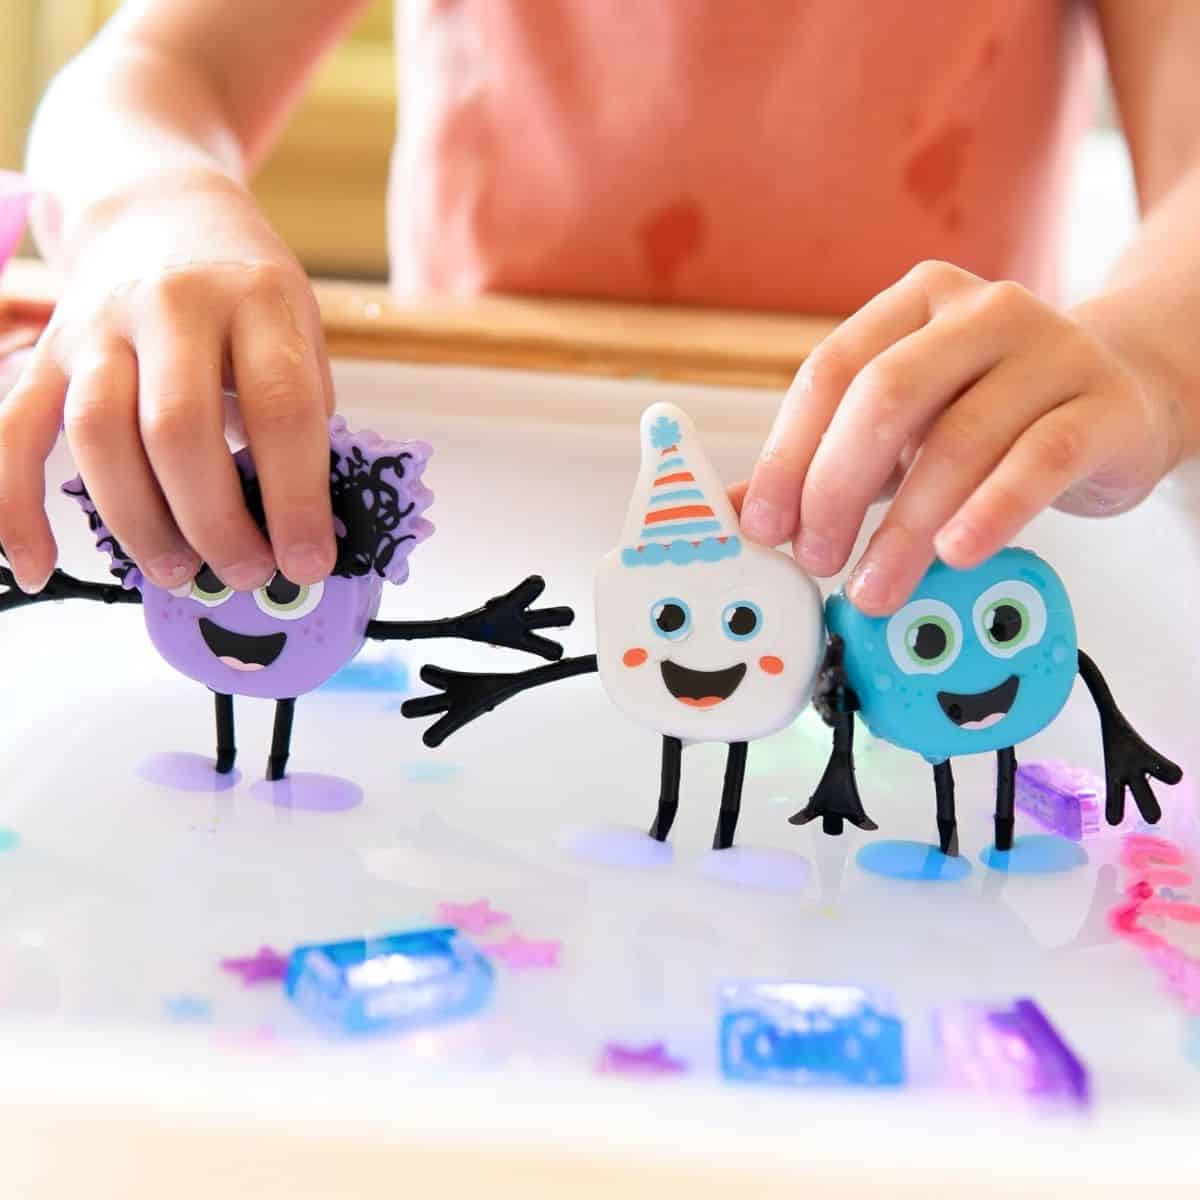 New Glo Pals Lumi Water-Activated Bath Toy with 6 Reusable Light-Up Cubes for Sensory Play